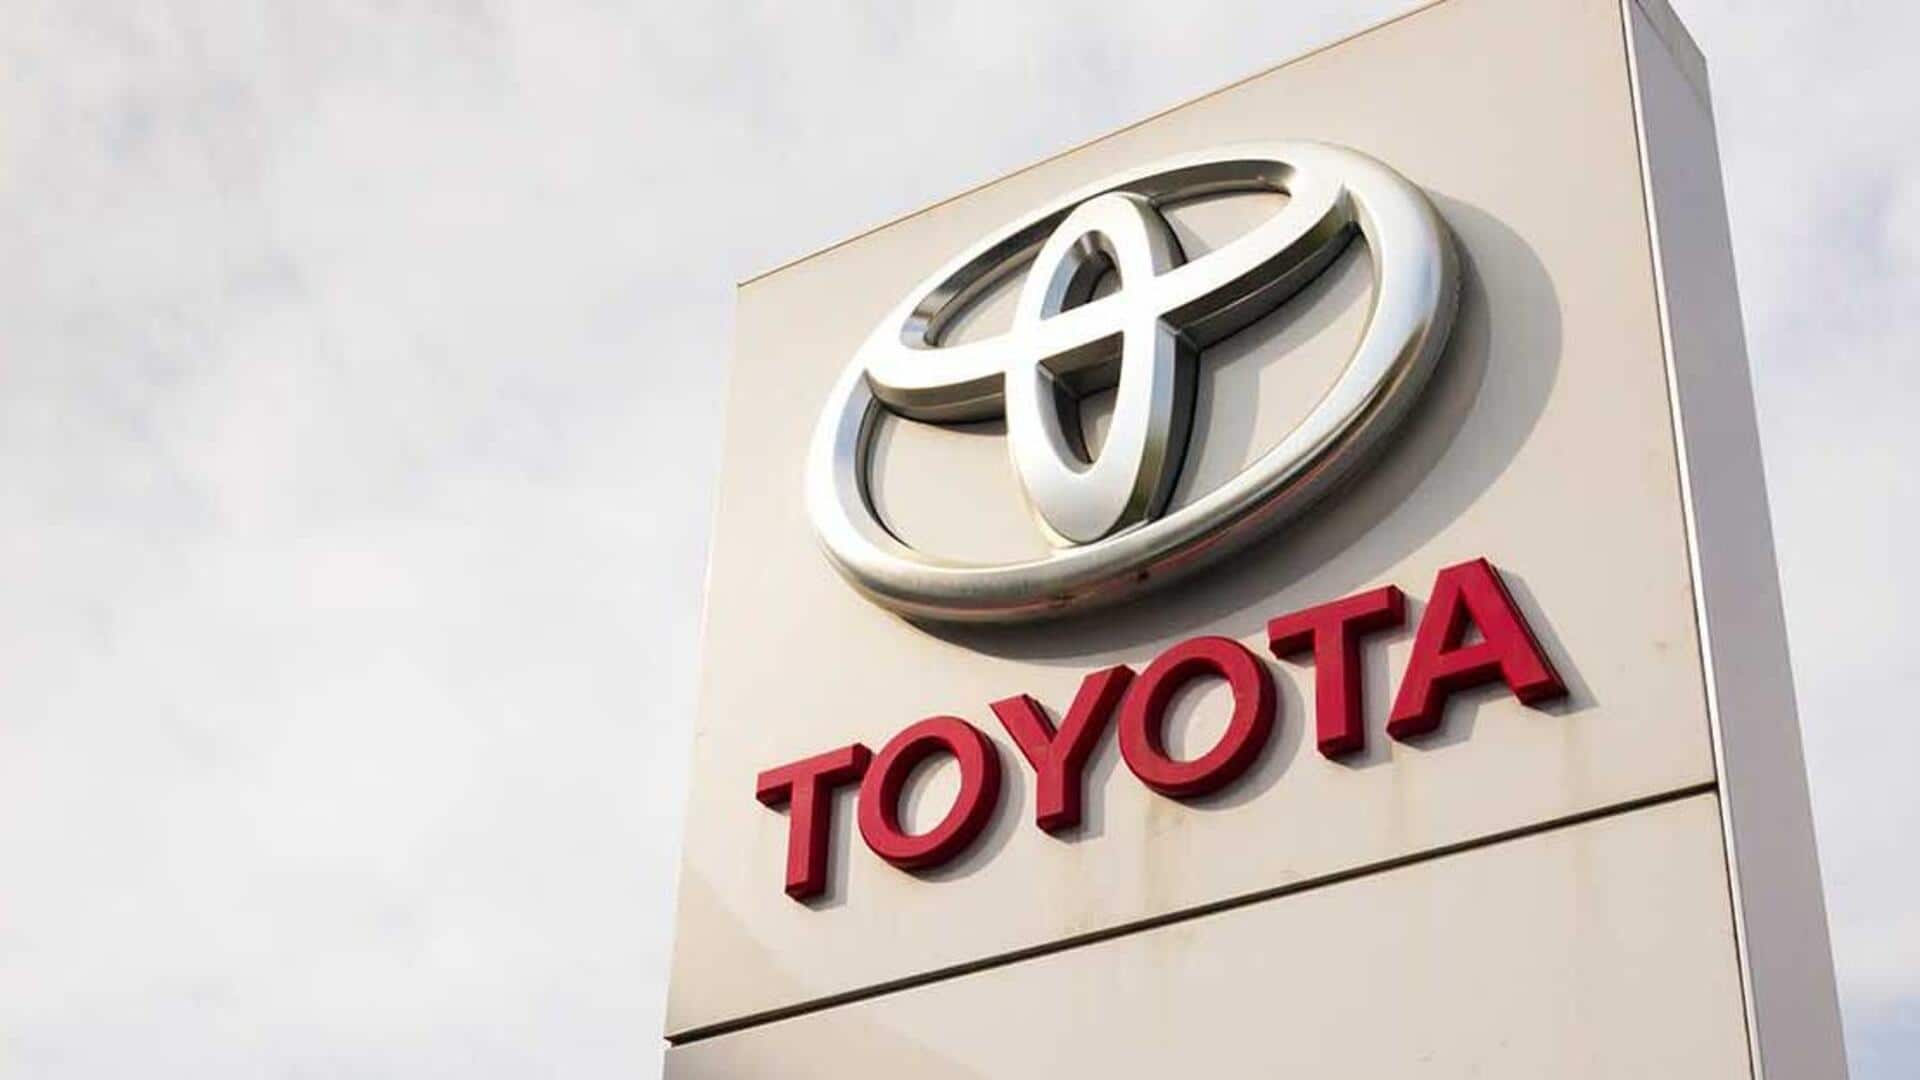 Japanese auto giants, including Toyota, caught in testing scandal